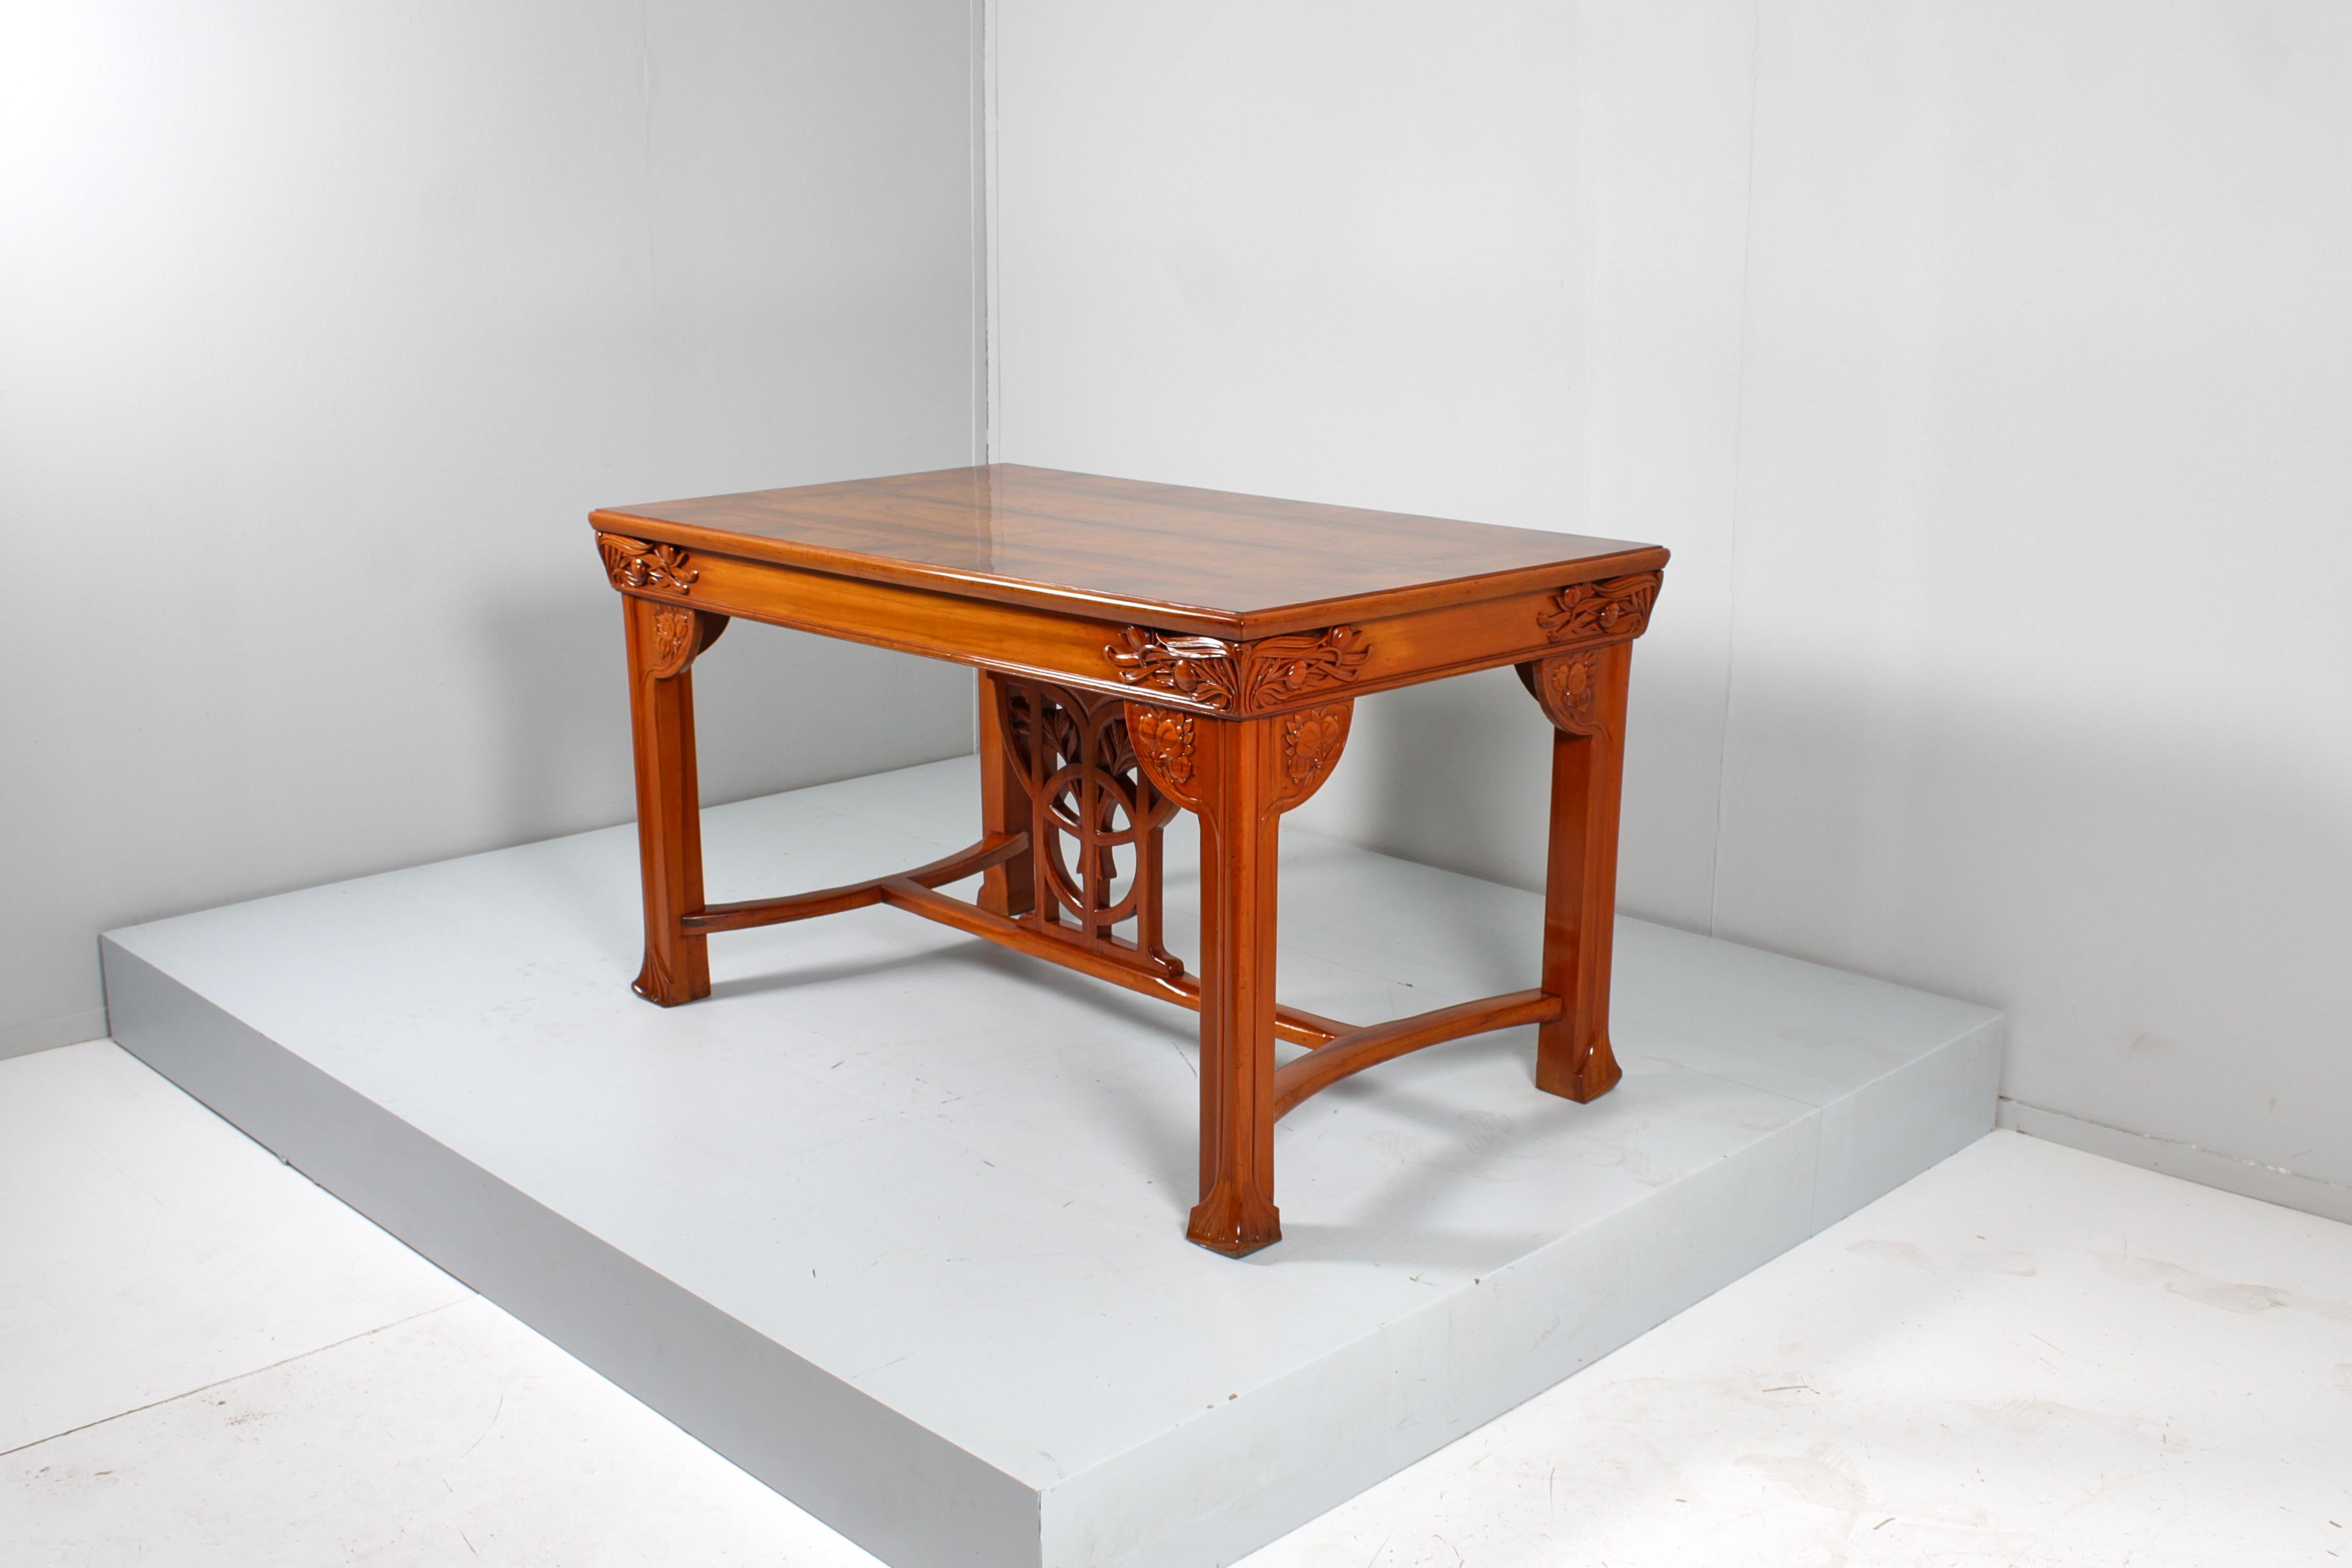 Early 20th Century Art Nouveau V. Ducrot Restored Inlaid and Carved Wood Table 1900 Italy For Sale